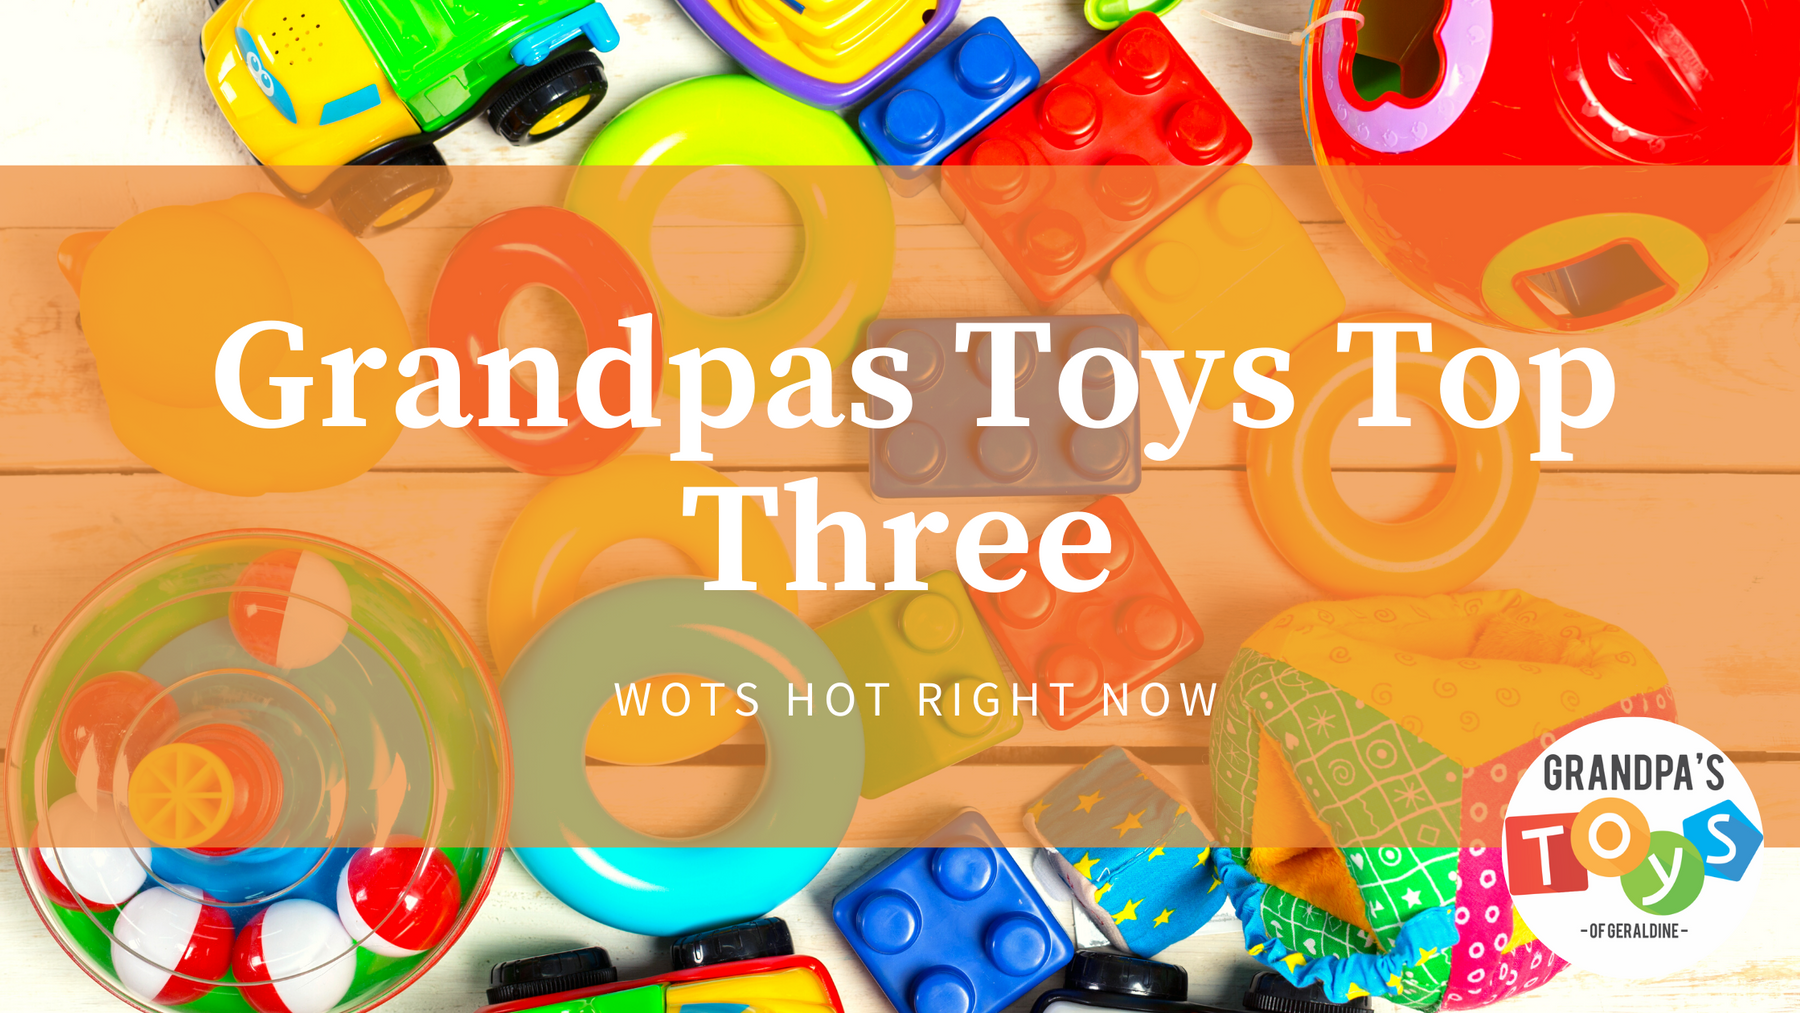 Grandpas Toys top three online searches for childrens toys.